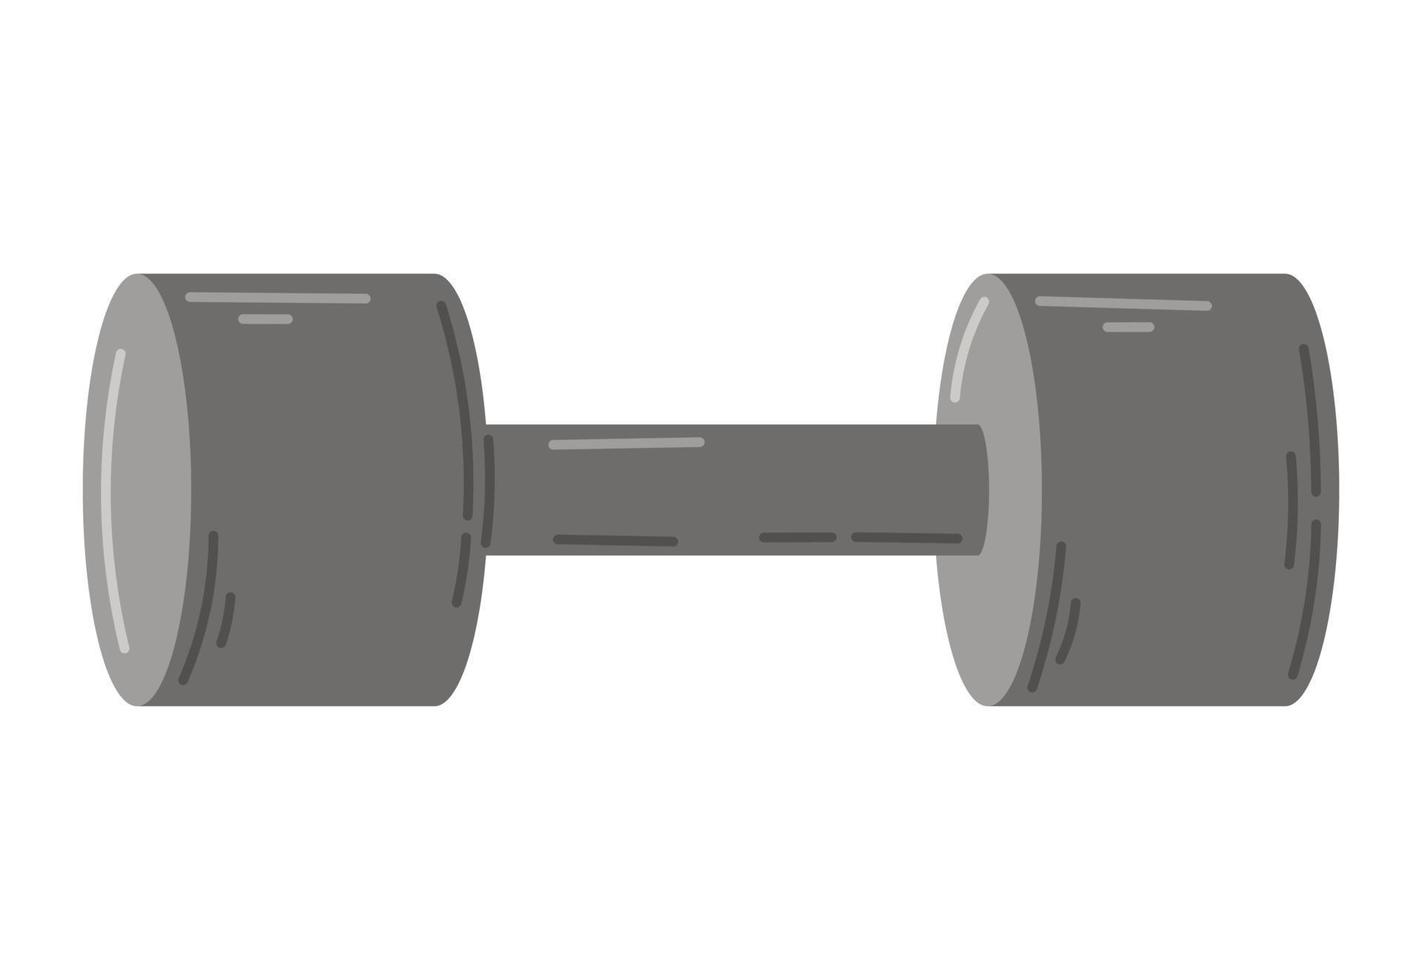 Metal Dumbbell for sports. Vector flat illustration isolated on white background.